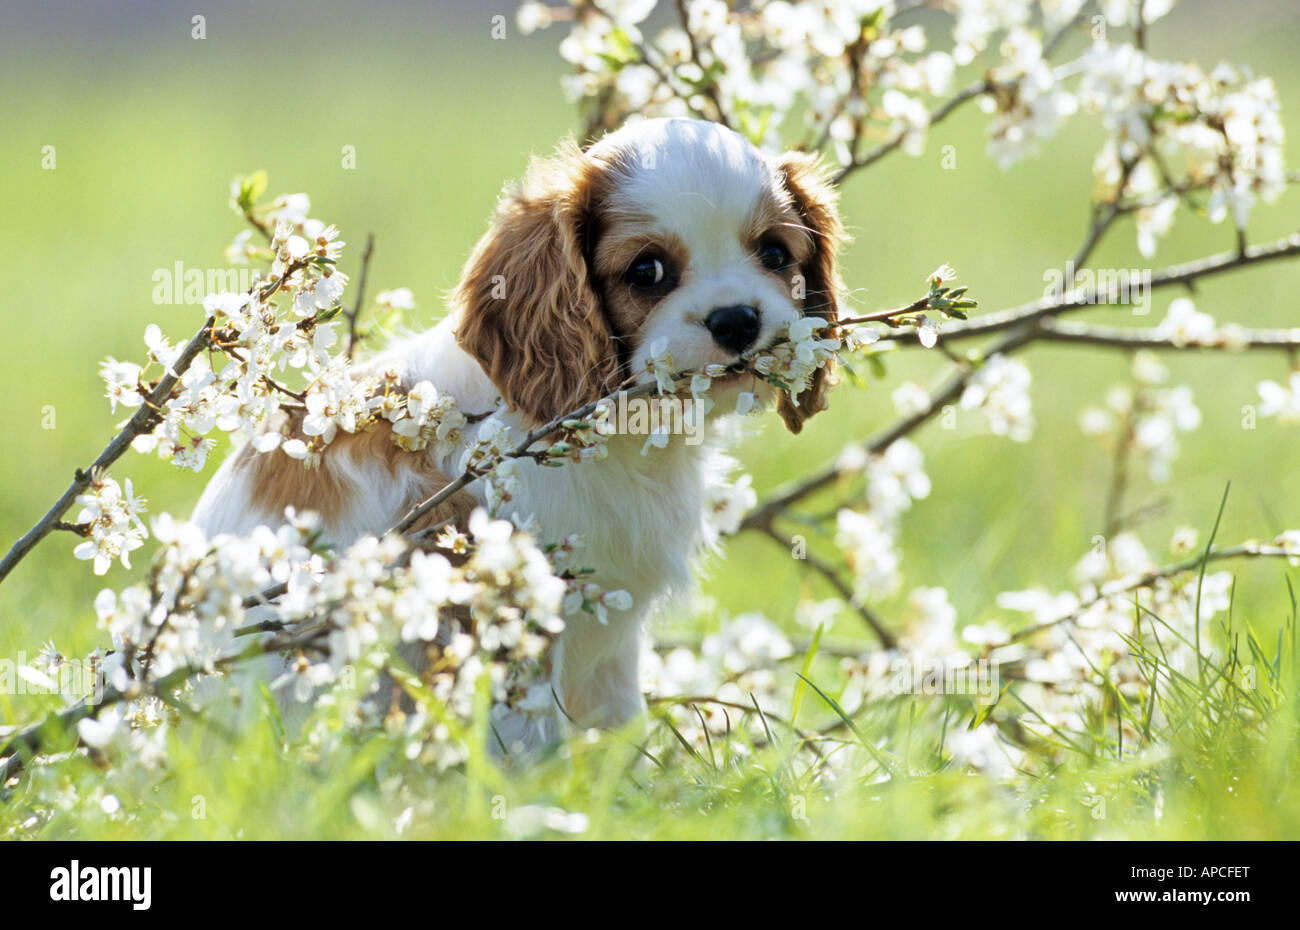 Cavalier King Charles Spaniel (Canis lupus familiaris9, puppy chewing on flowering twig Stock Photo